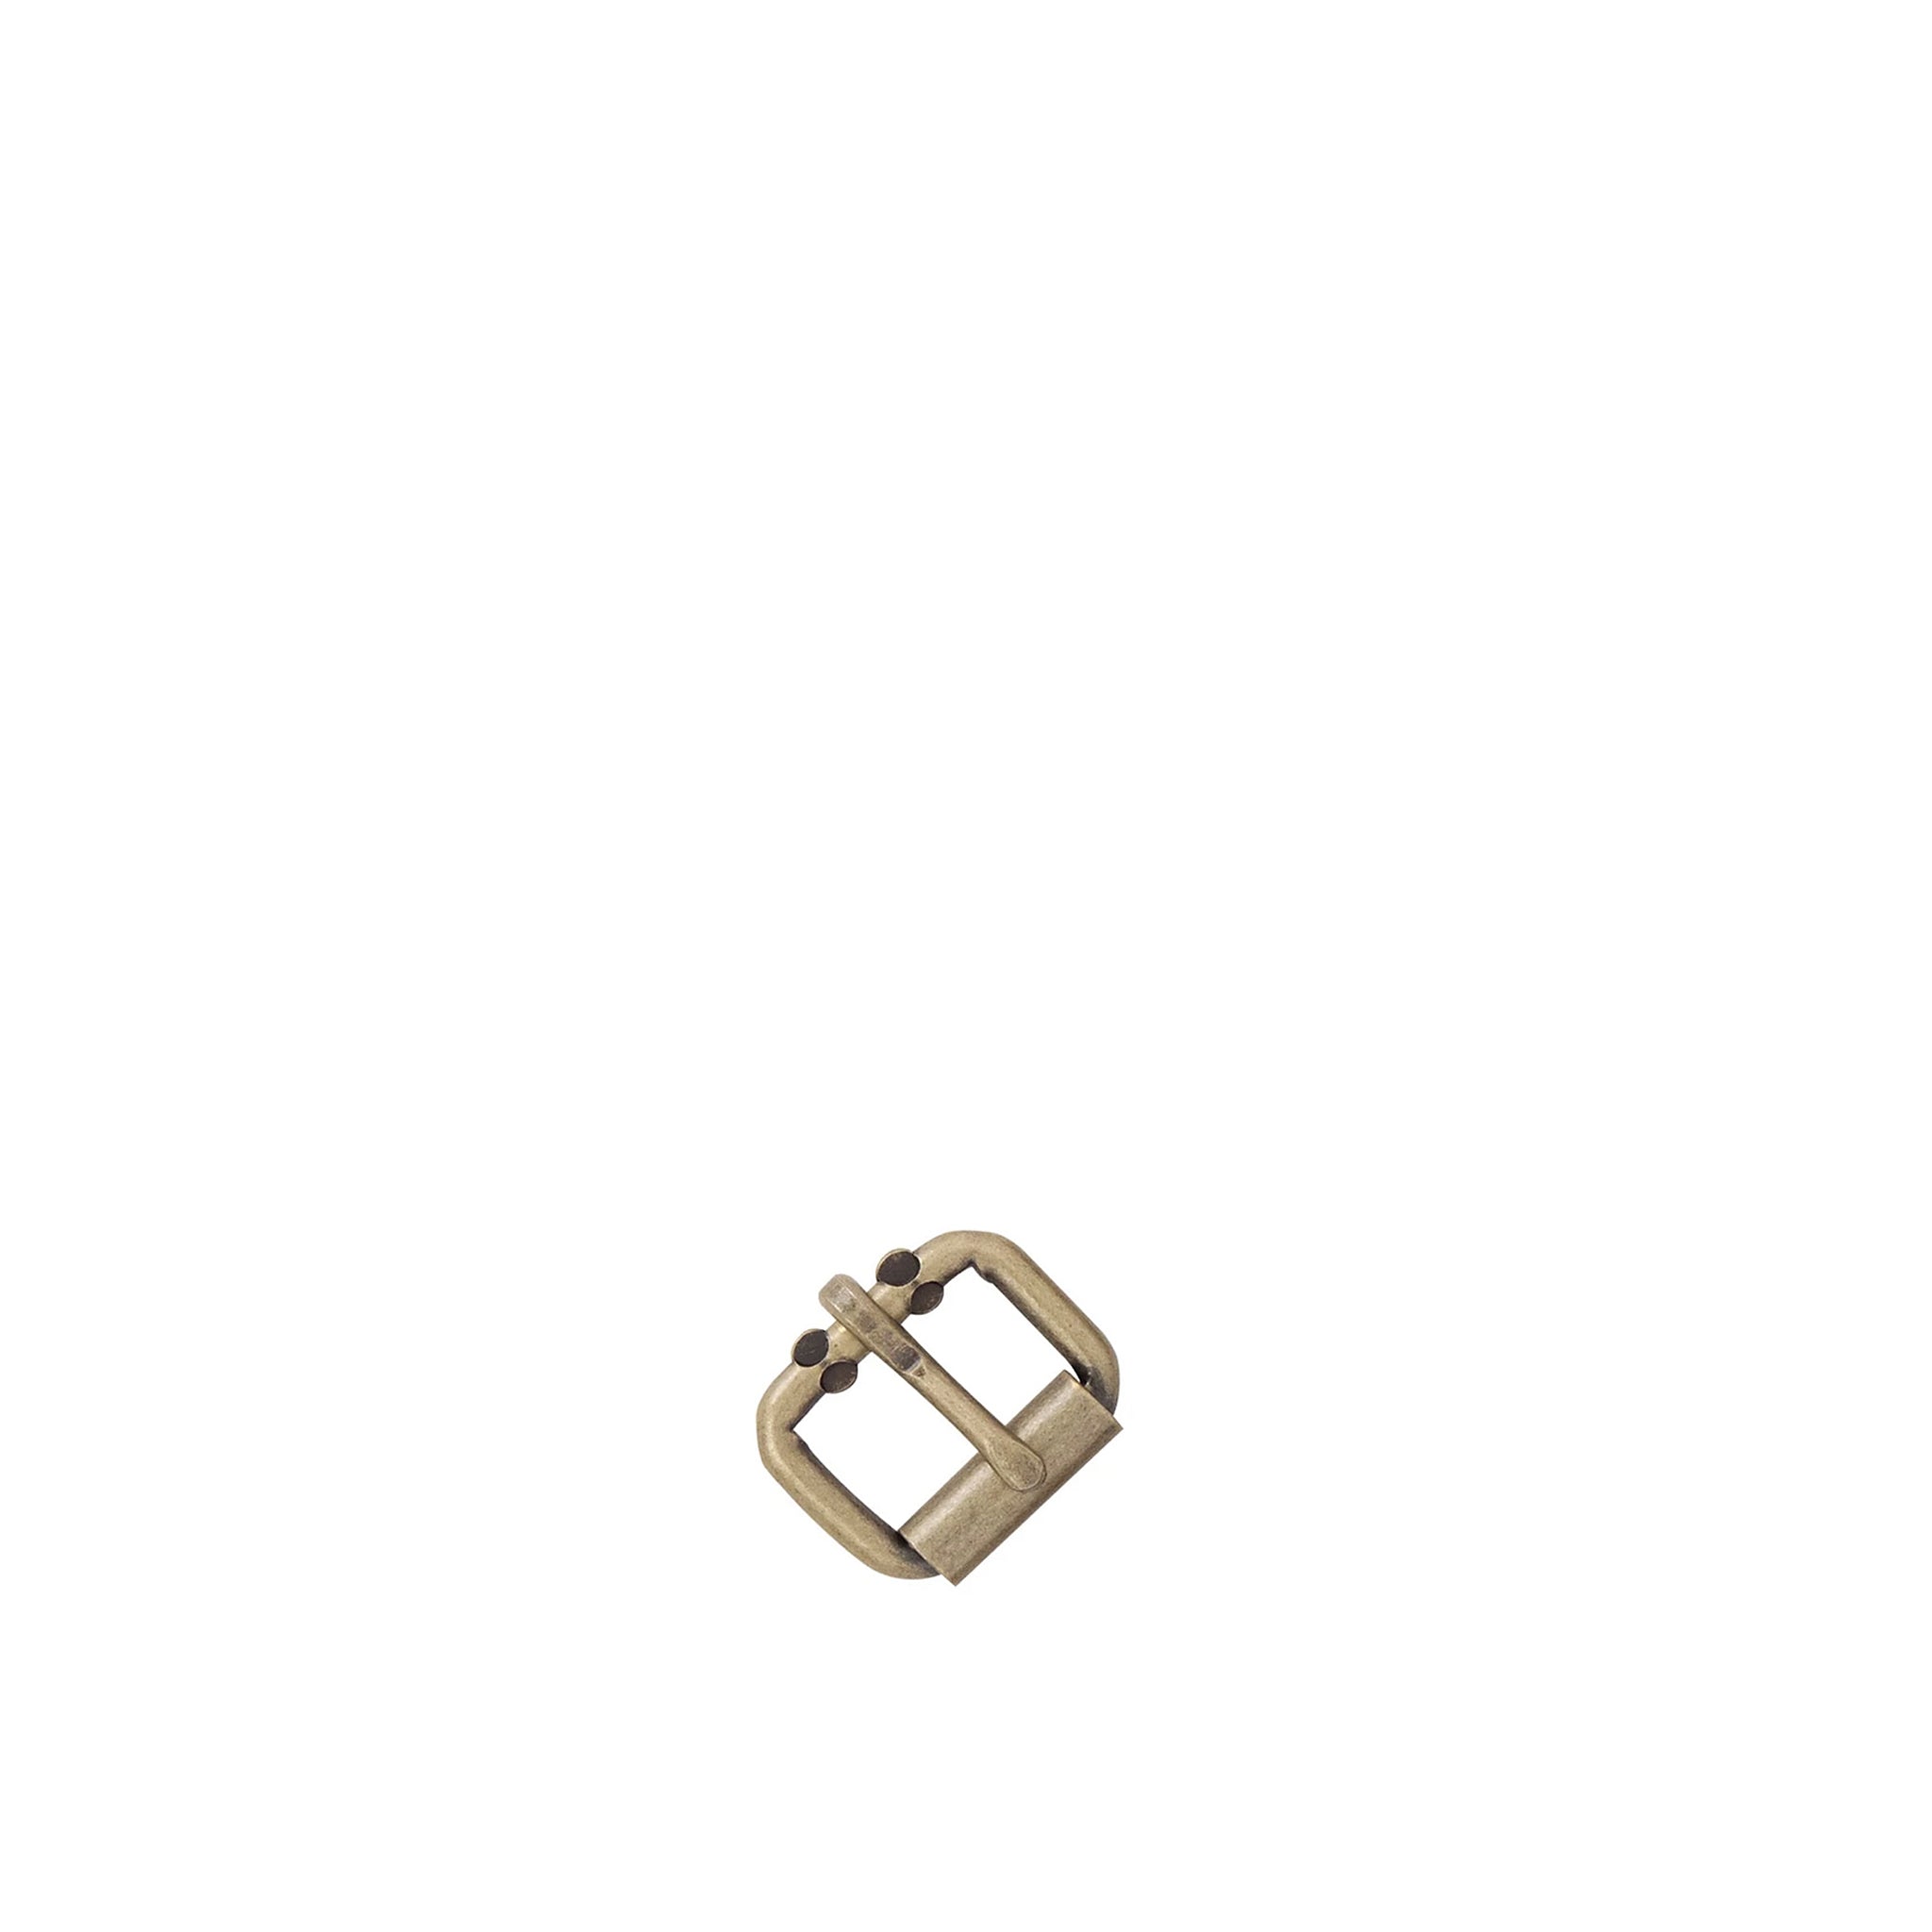 32mm Single Prong Roller Buckle - Antique Brass from Identity Leathercraft